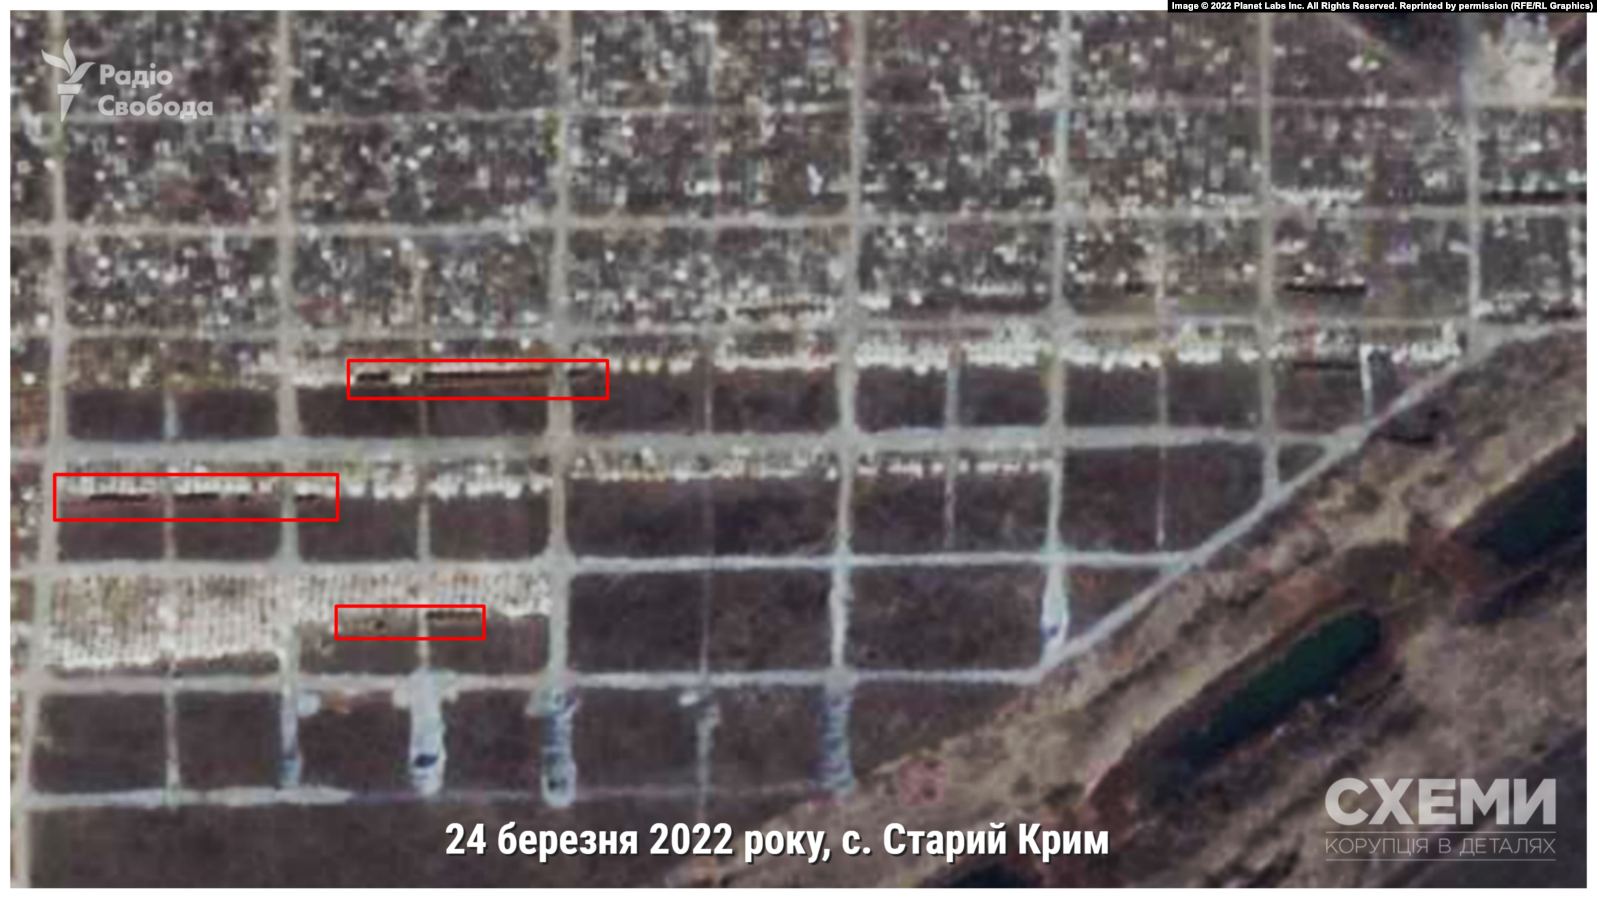 Satellite images show the third place of mass burial near Mariupol - Schemy